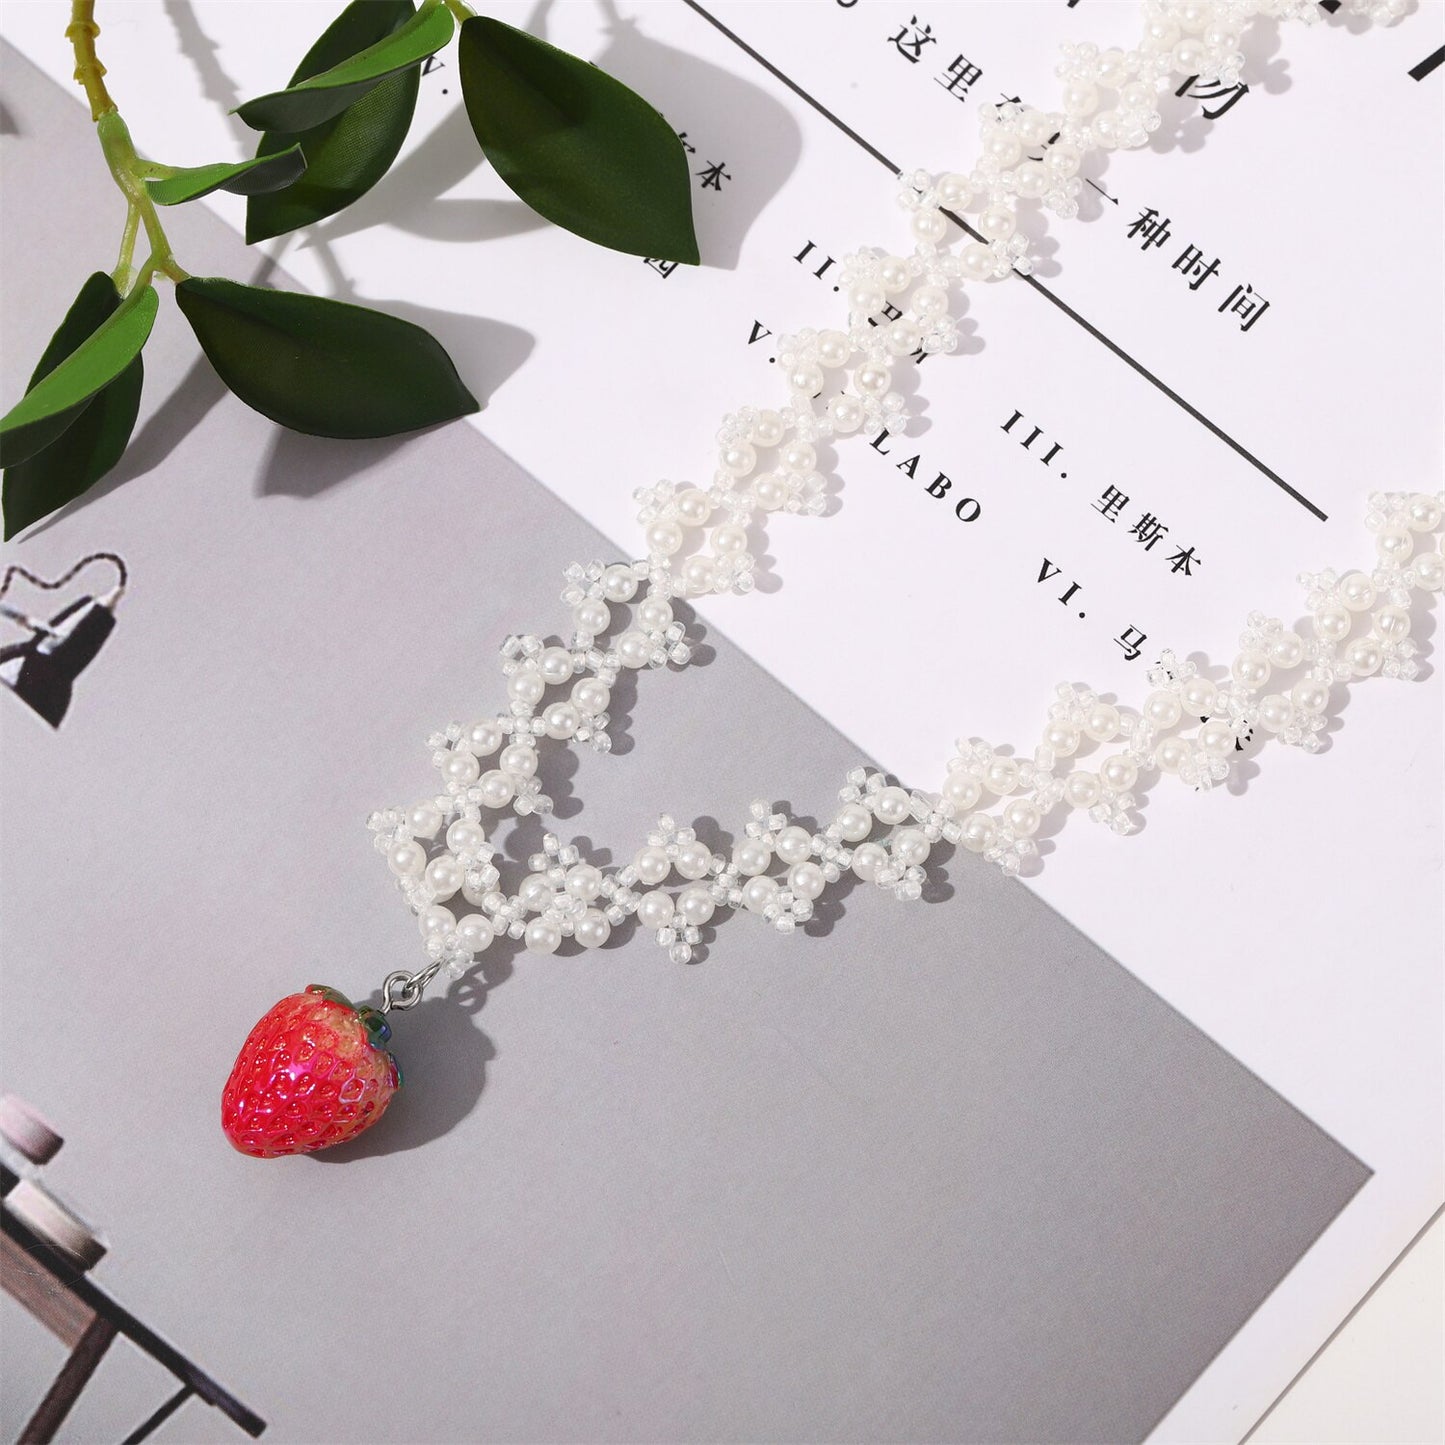 Fashion Red Cherry Strawberry Pendant Pearl Chain Women's Necklace Choker Charm Metal Sweater Chain Women Resin Jewelry Gift